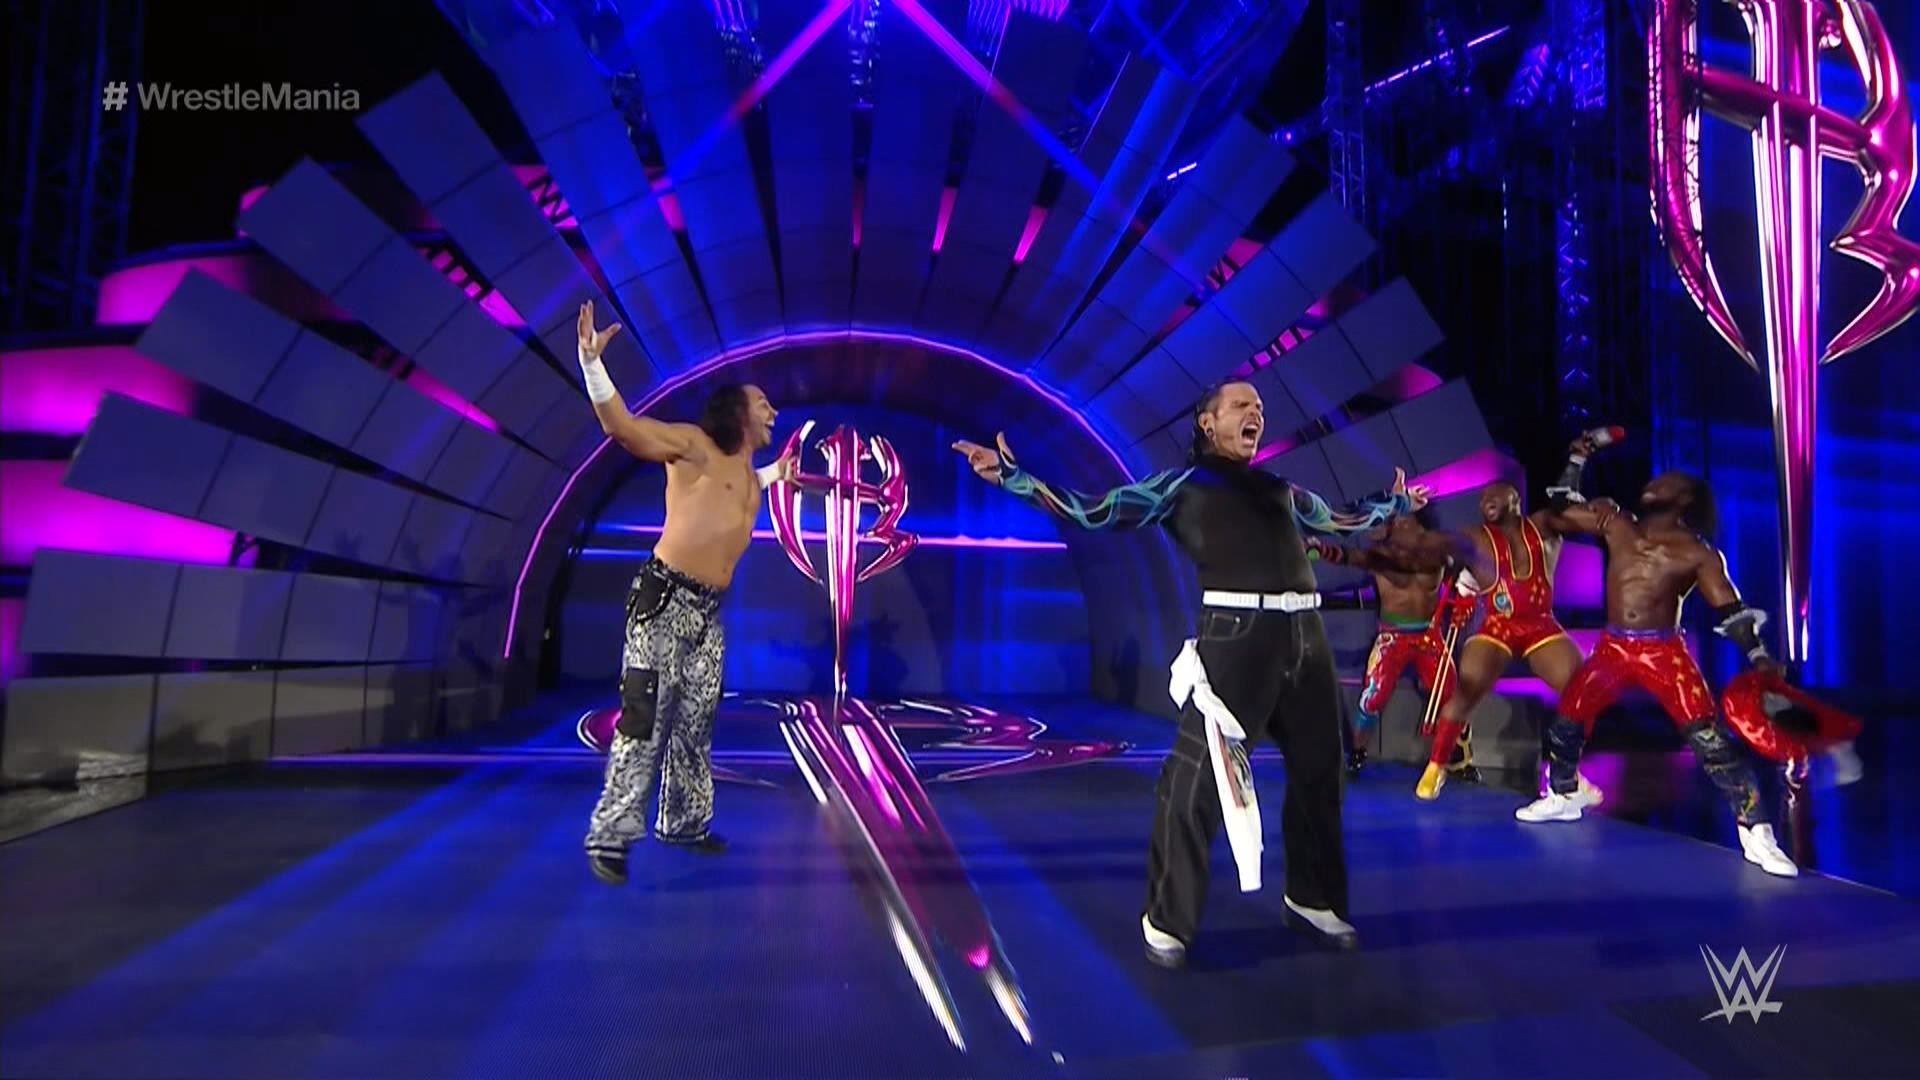 1920x1080 Watch this WrestleMania moment as Matt and Jeff Hardy return to the WWE at  WrestleMania 33